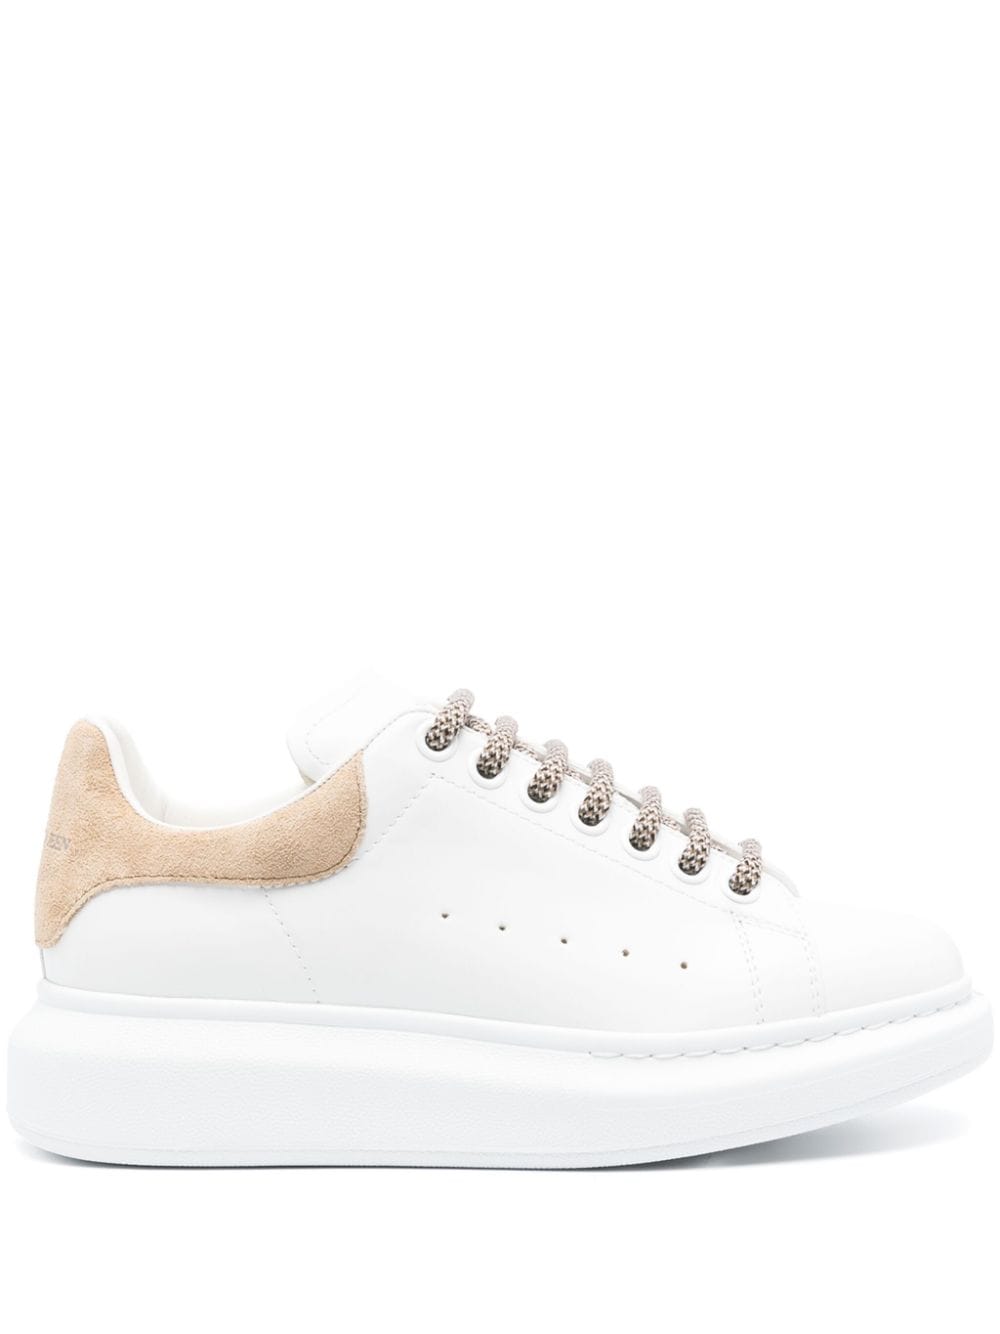 Alexander Mcqueen Oversized Leather Sneakers In White